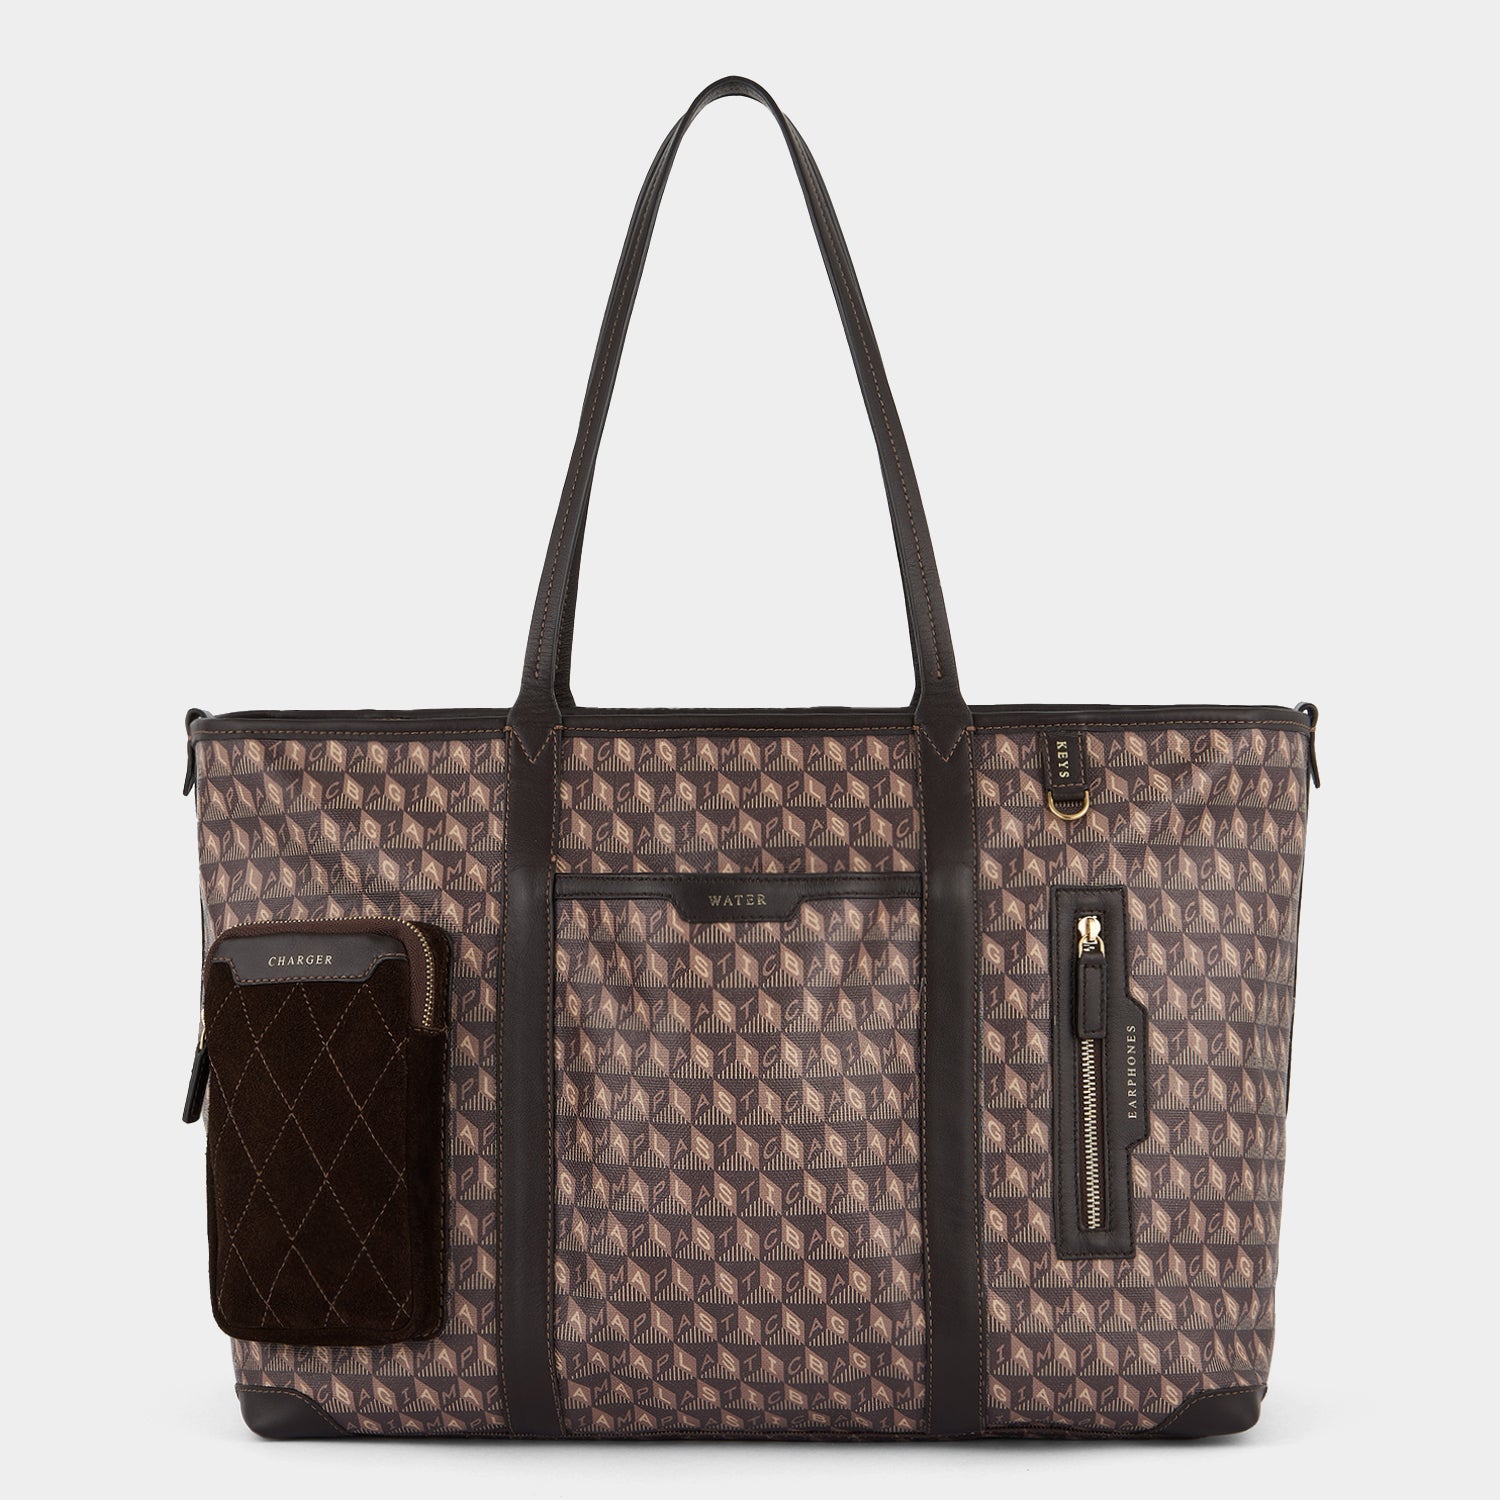 Zim Beauty World - Louis Vuitton mini tote bag available in store